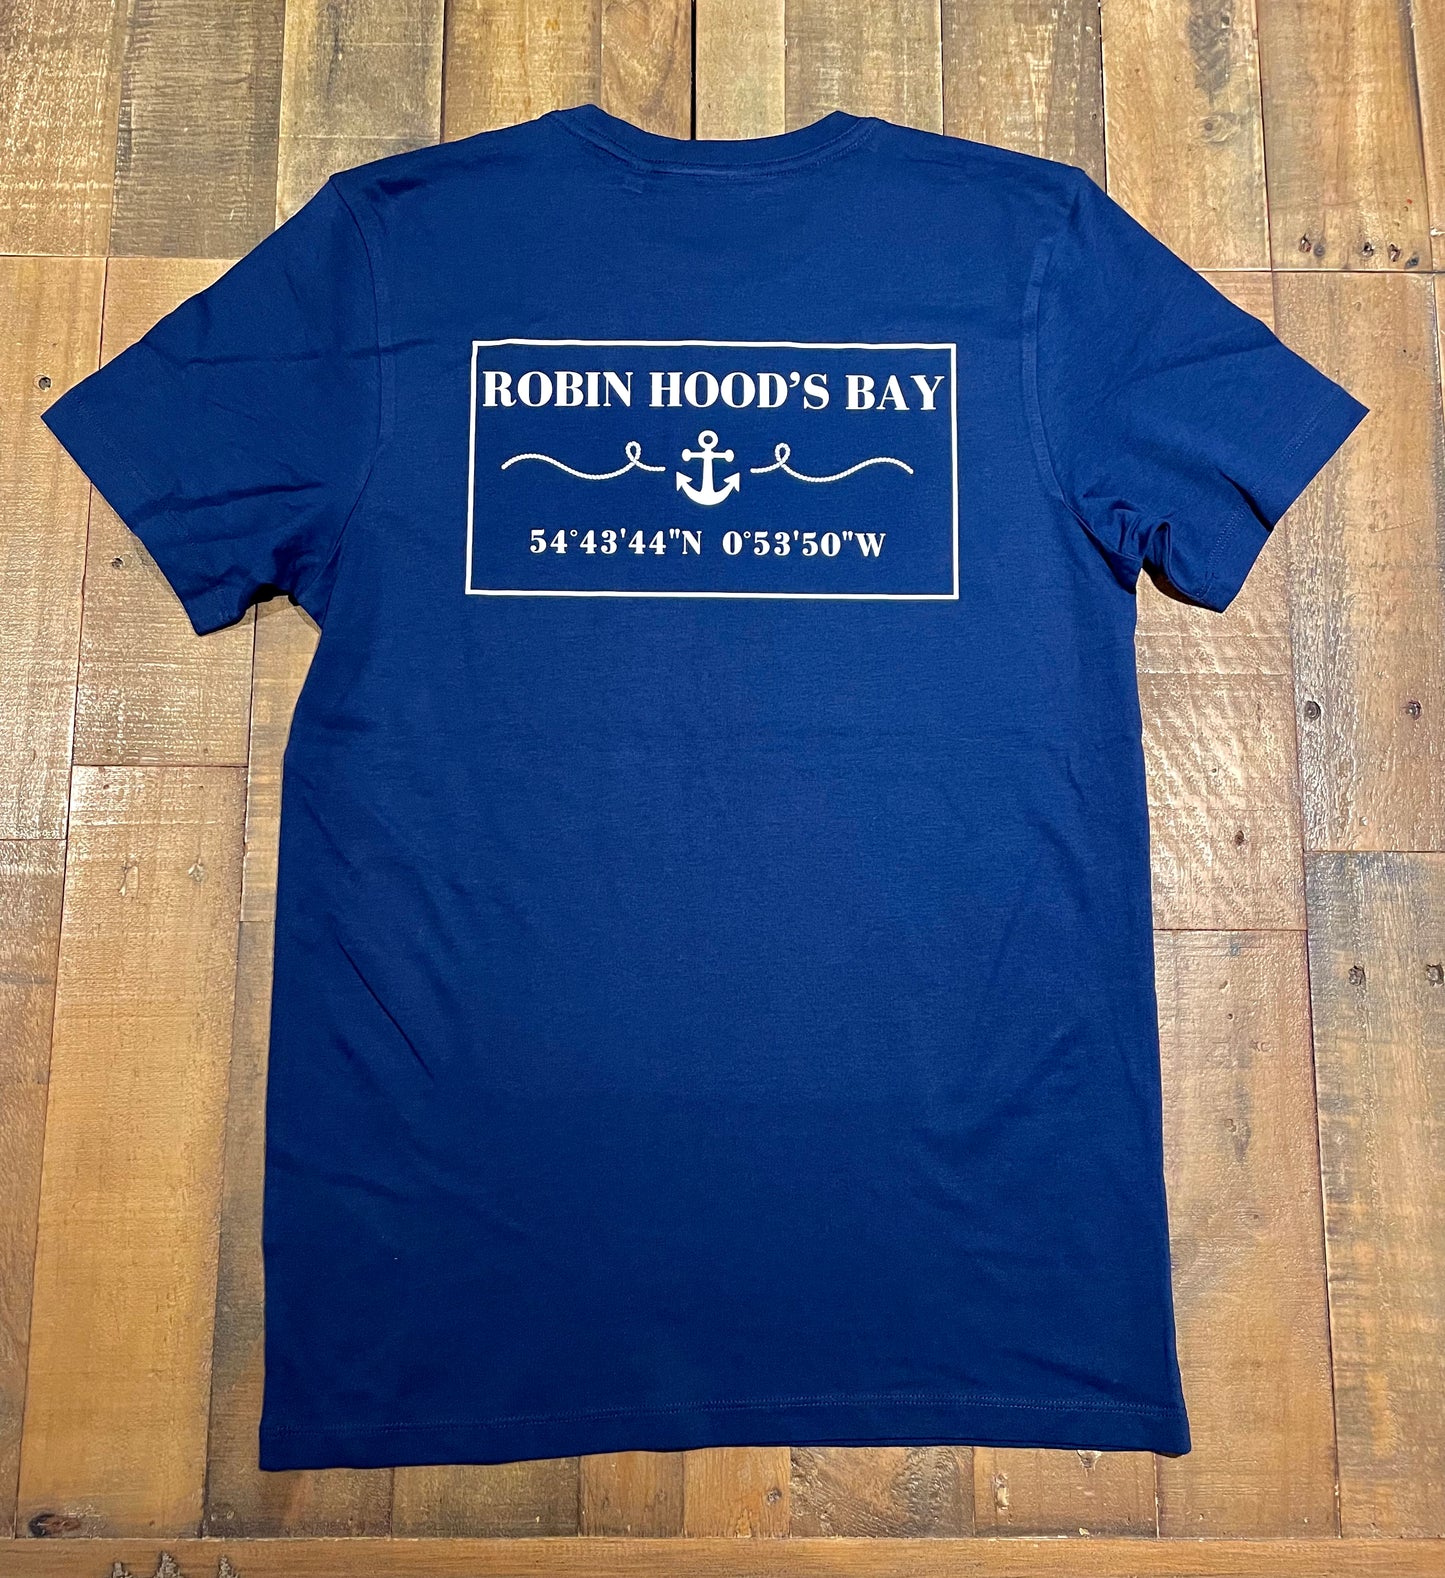 The unisex Robin Hood’s Bay T-shirts in navy blue from The Bay Company. 